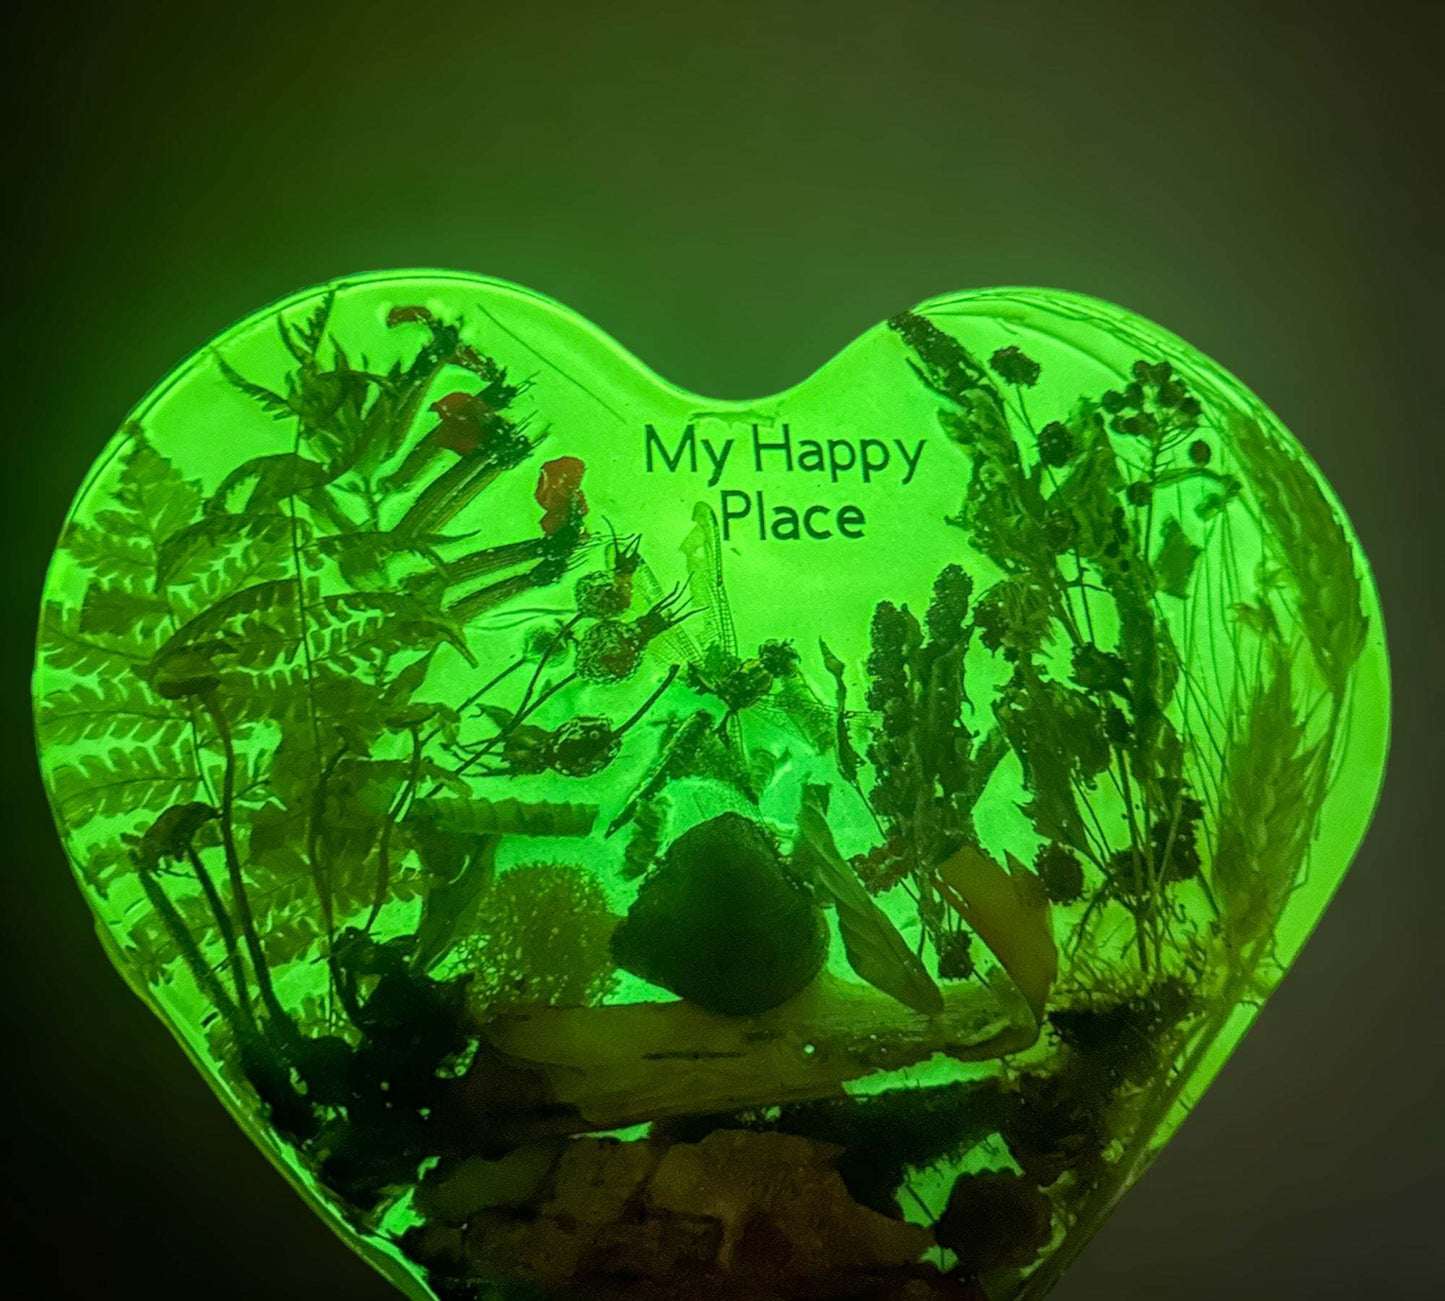 Botanical Wall Art "My Happy Place" Enchanted Serenity with LED Lights